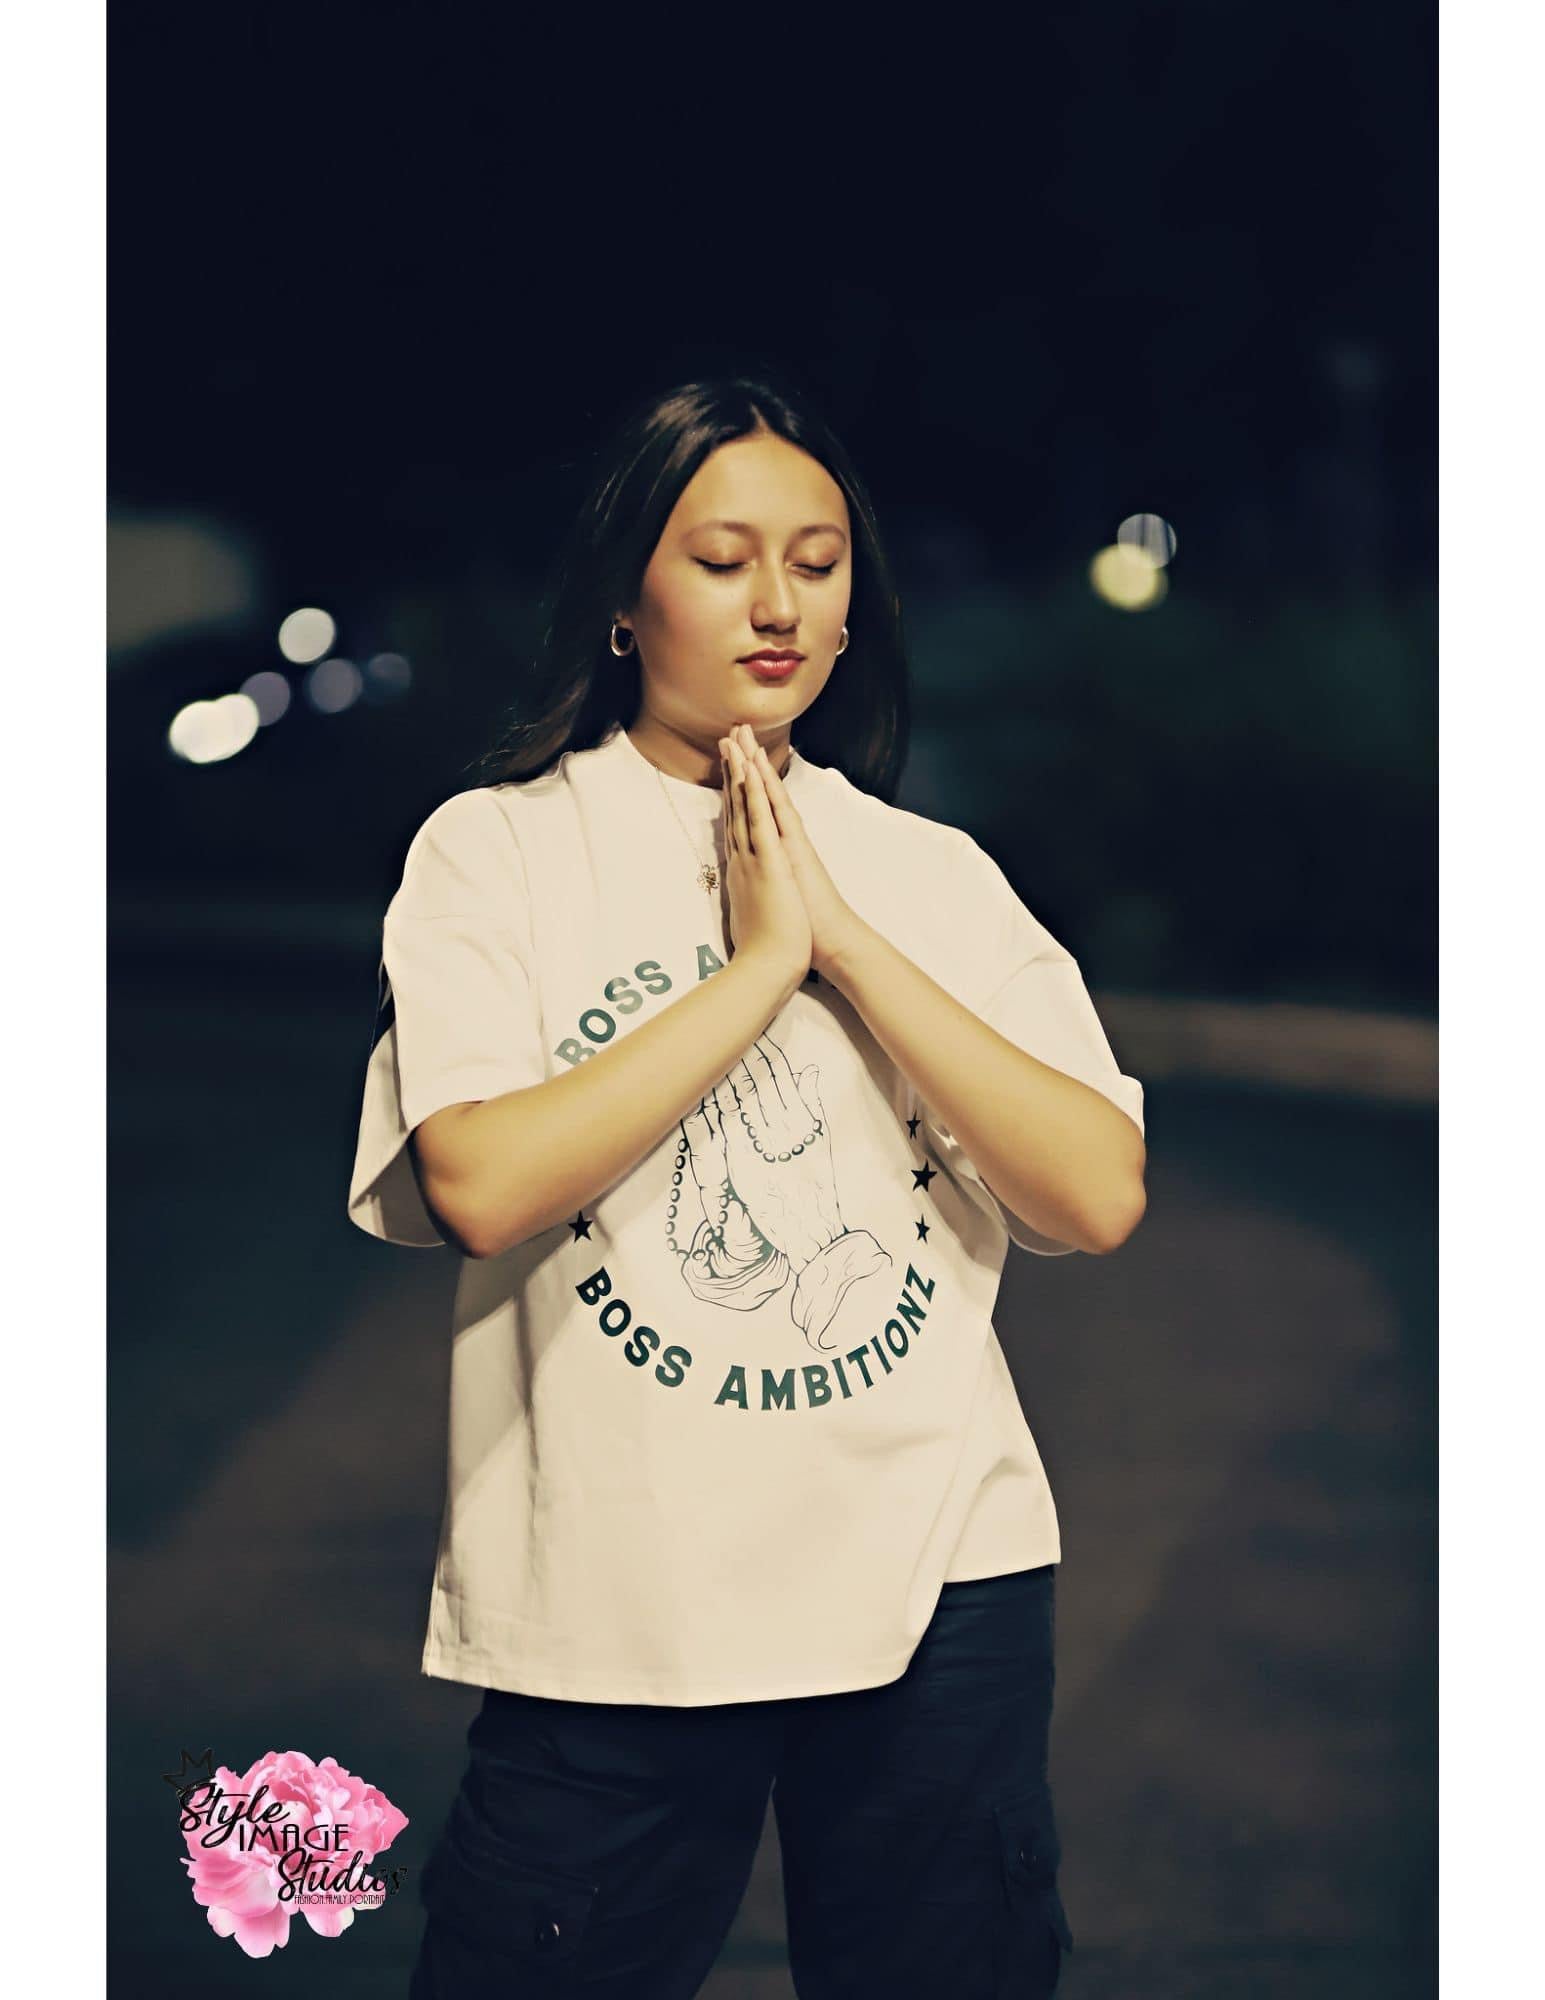 Miss Junior Teen United USA stands serene in the night, her hands clasped in prayer, wearing the Boss Ambitionz Everyday Luxe Oversized T-Shirt. The image captures a moment of reflection, highlighted by the iconic praying hands logo of Boss Ambitionz. Visit our website to explore the full collection at www.bossambitionz.com.